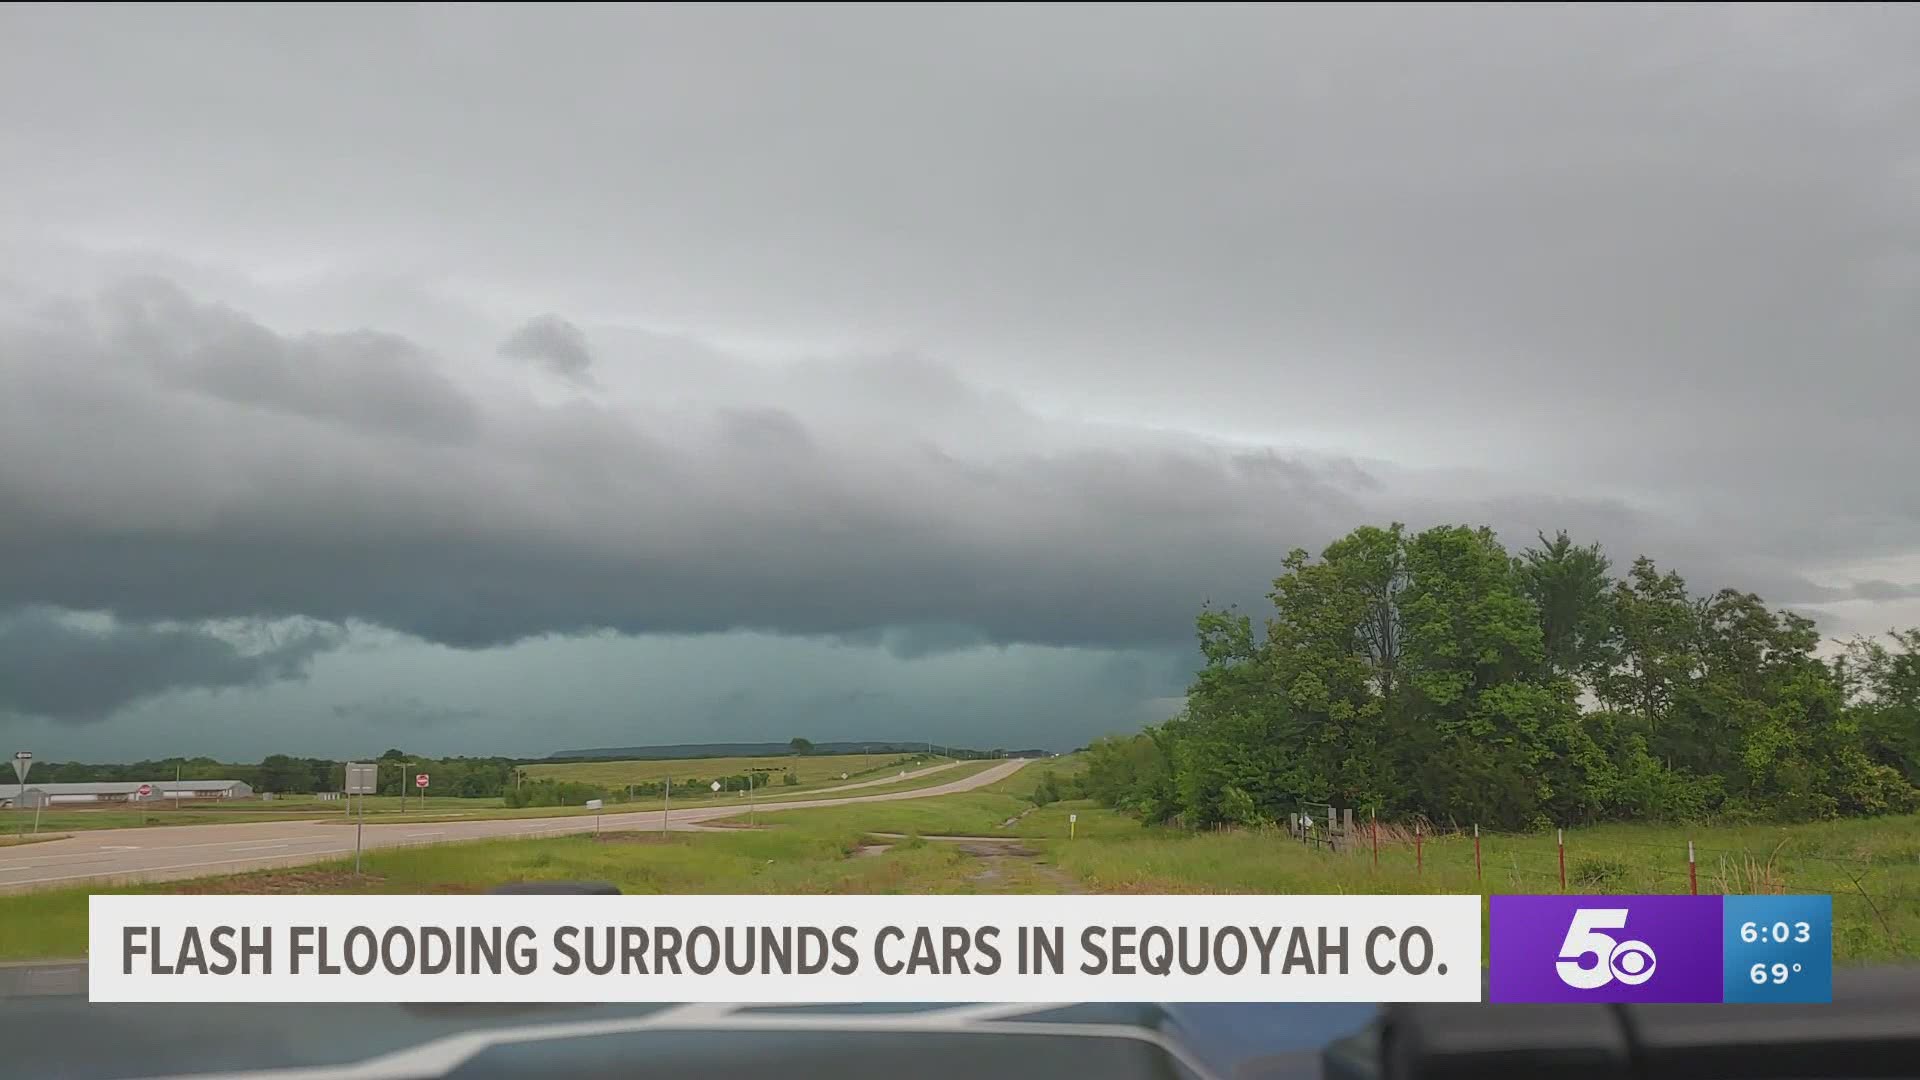 Flash flooding surrounds vehicles in Sequoyah County